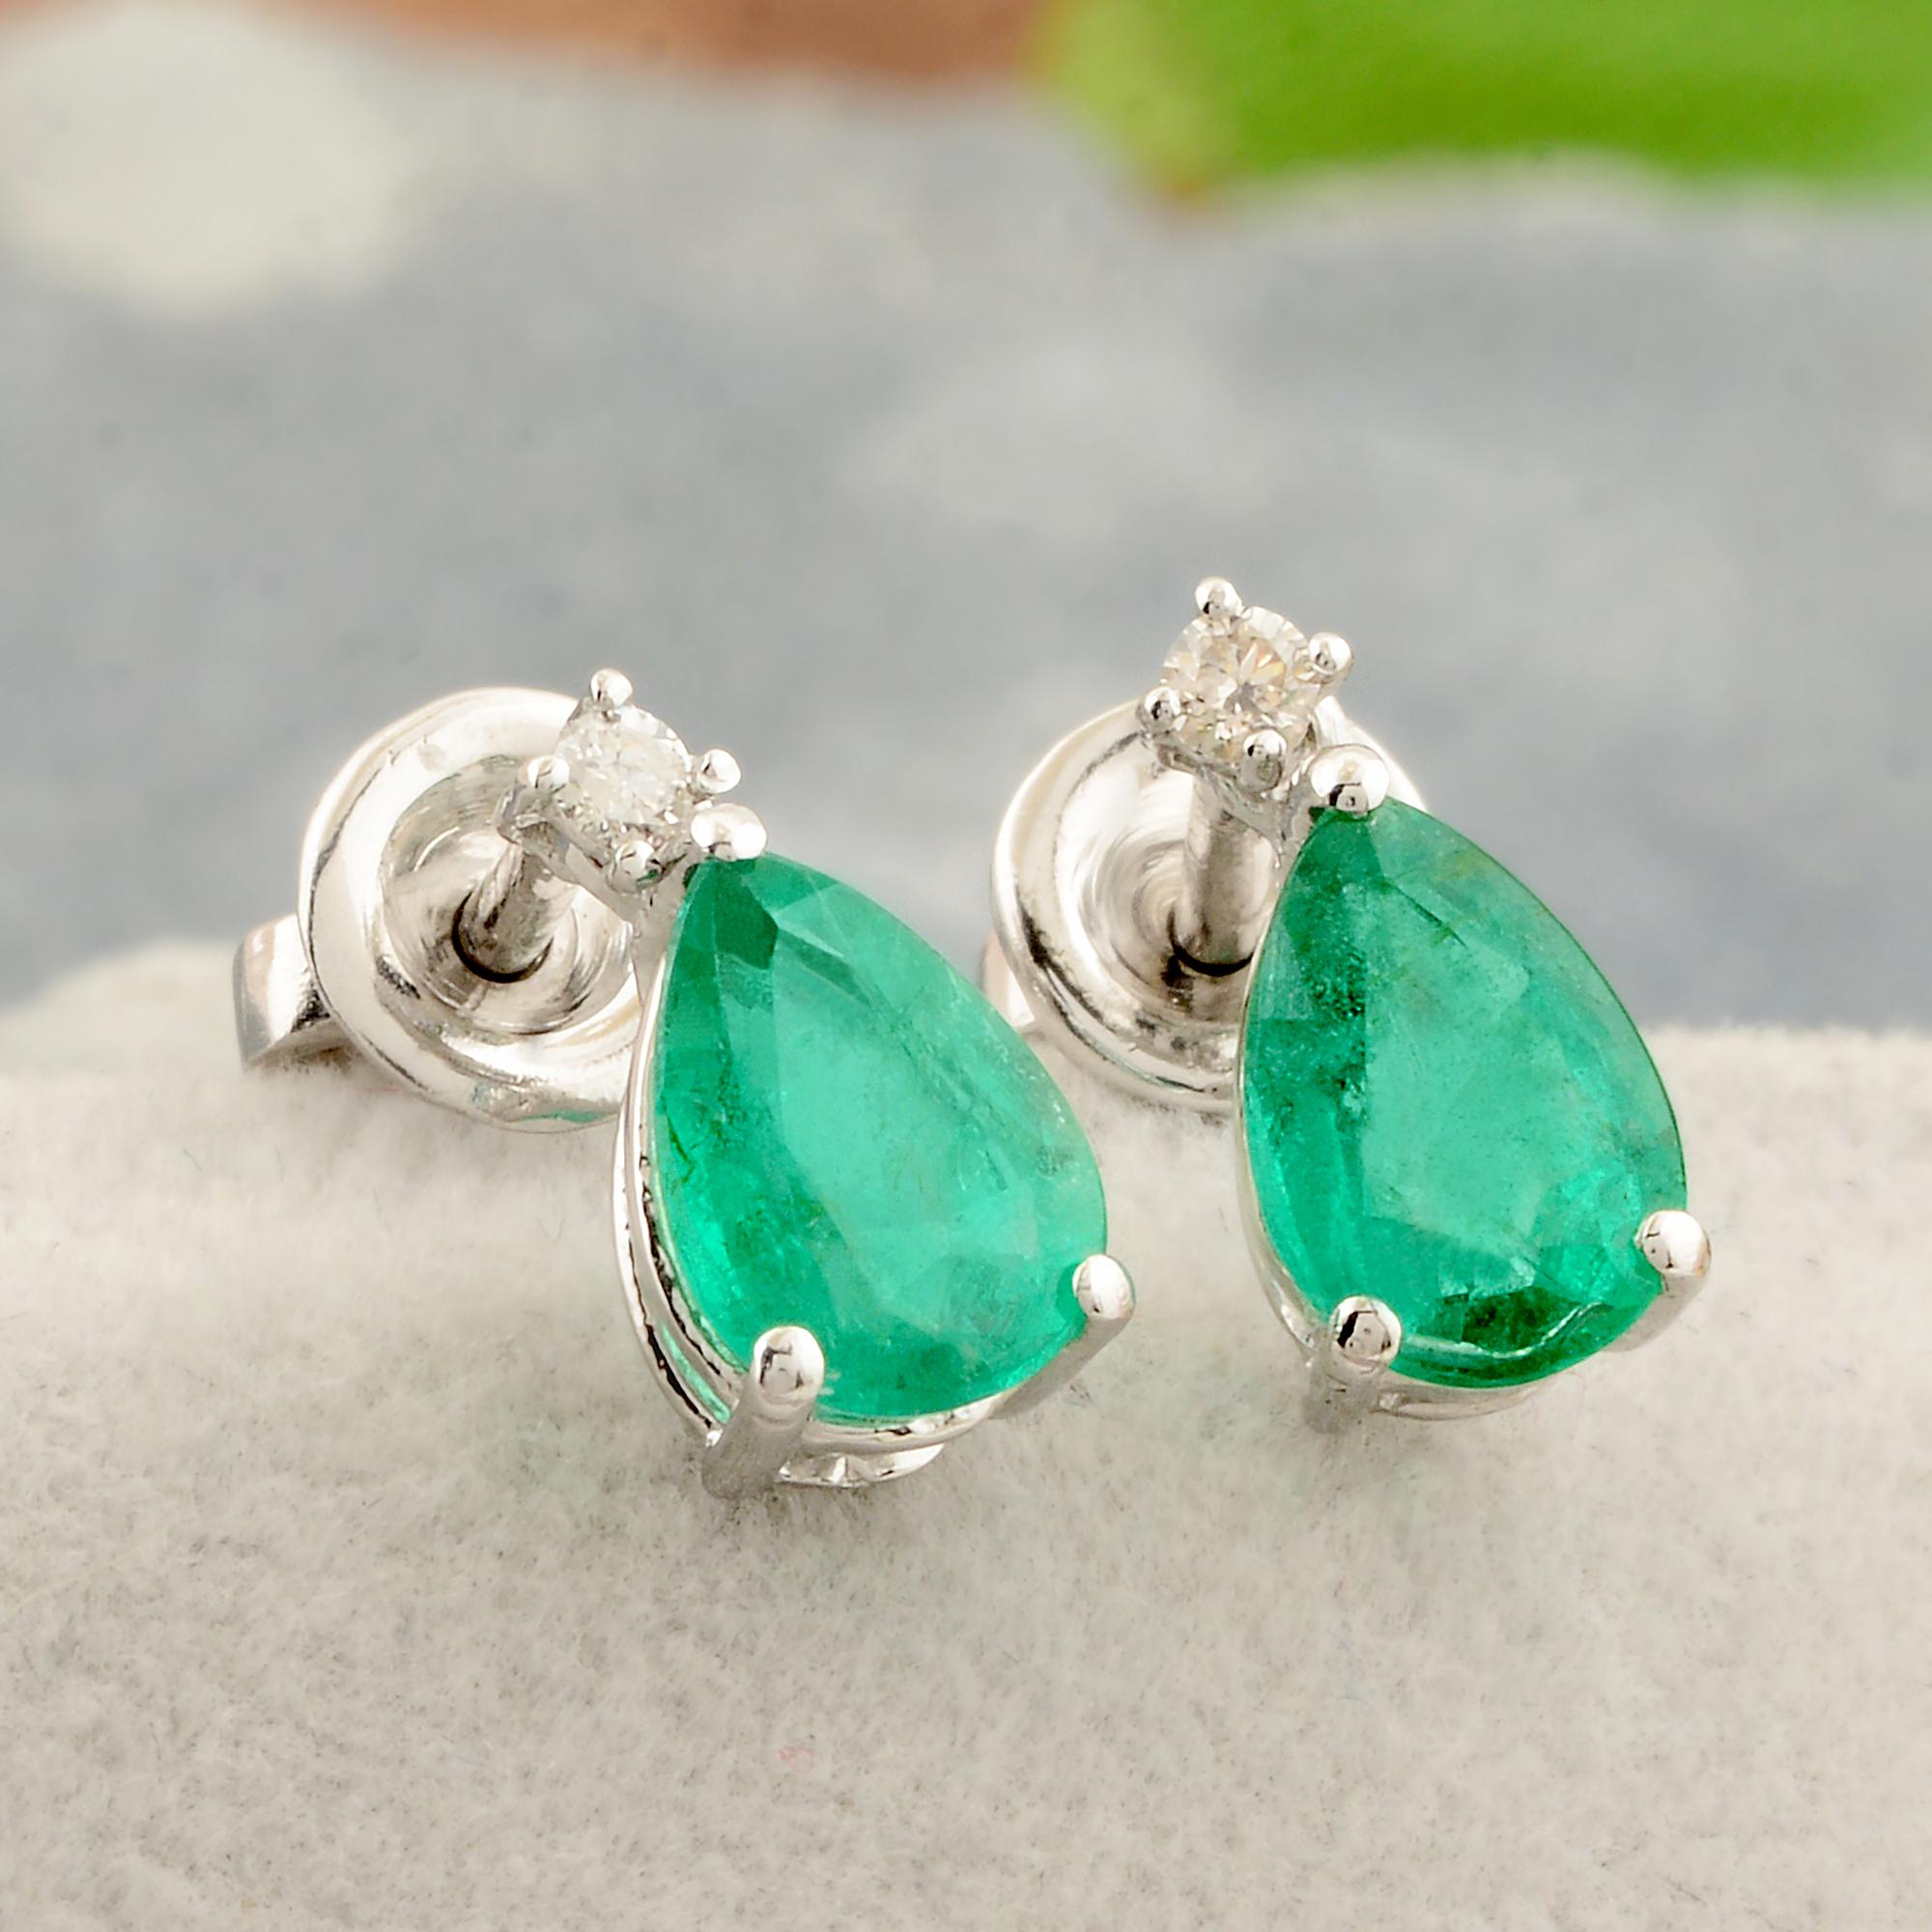 Pear Cut Pear Natural Emerald Gemstone Stud Earrings Diamond Solid 10k White Gold Jewelry For Sale